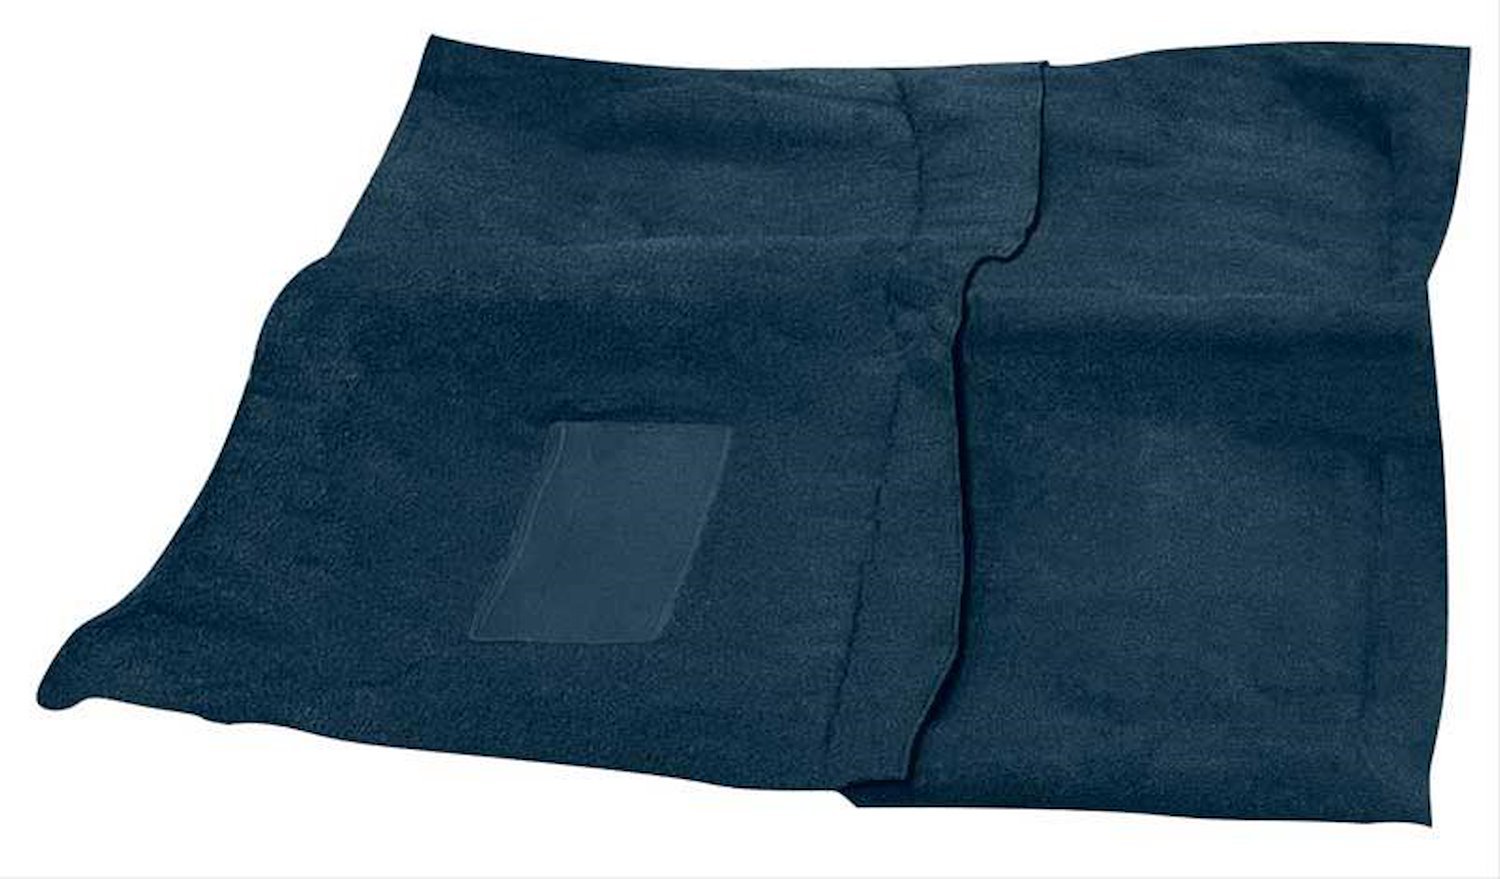 MA530507 Loop Carpet With Tails 1968-69 Dodge Dart Convertible With 4-Speed Dark Blue